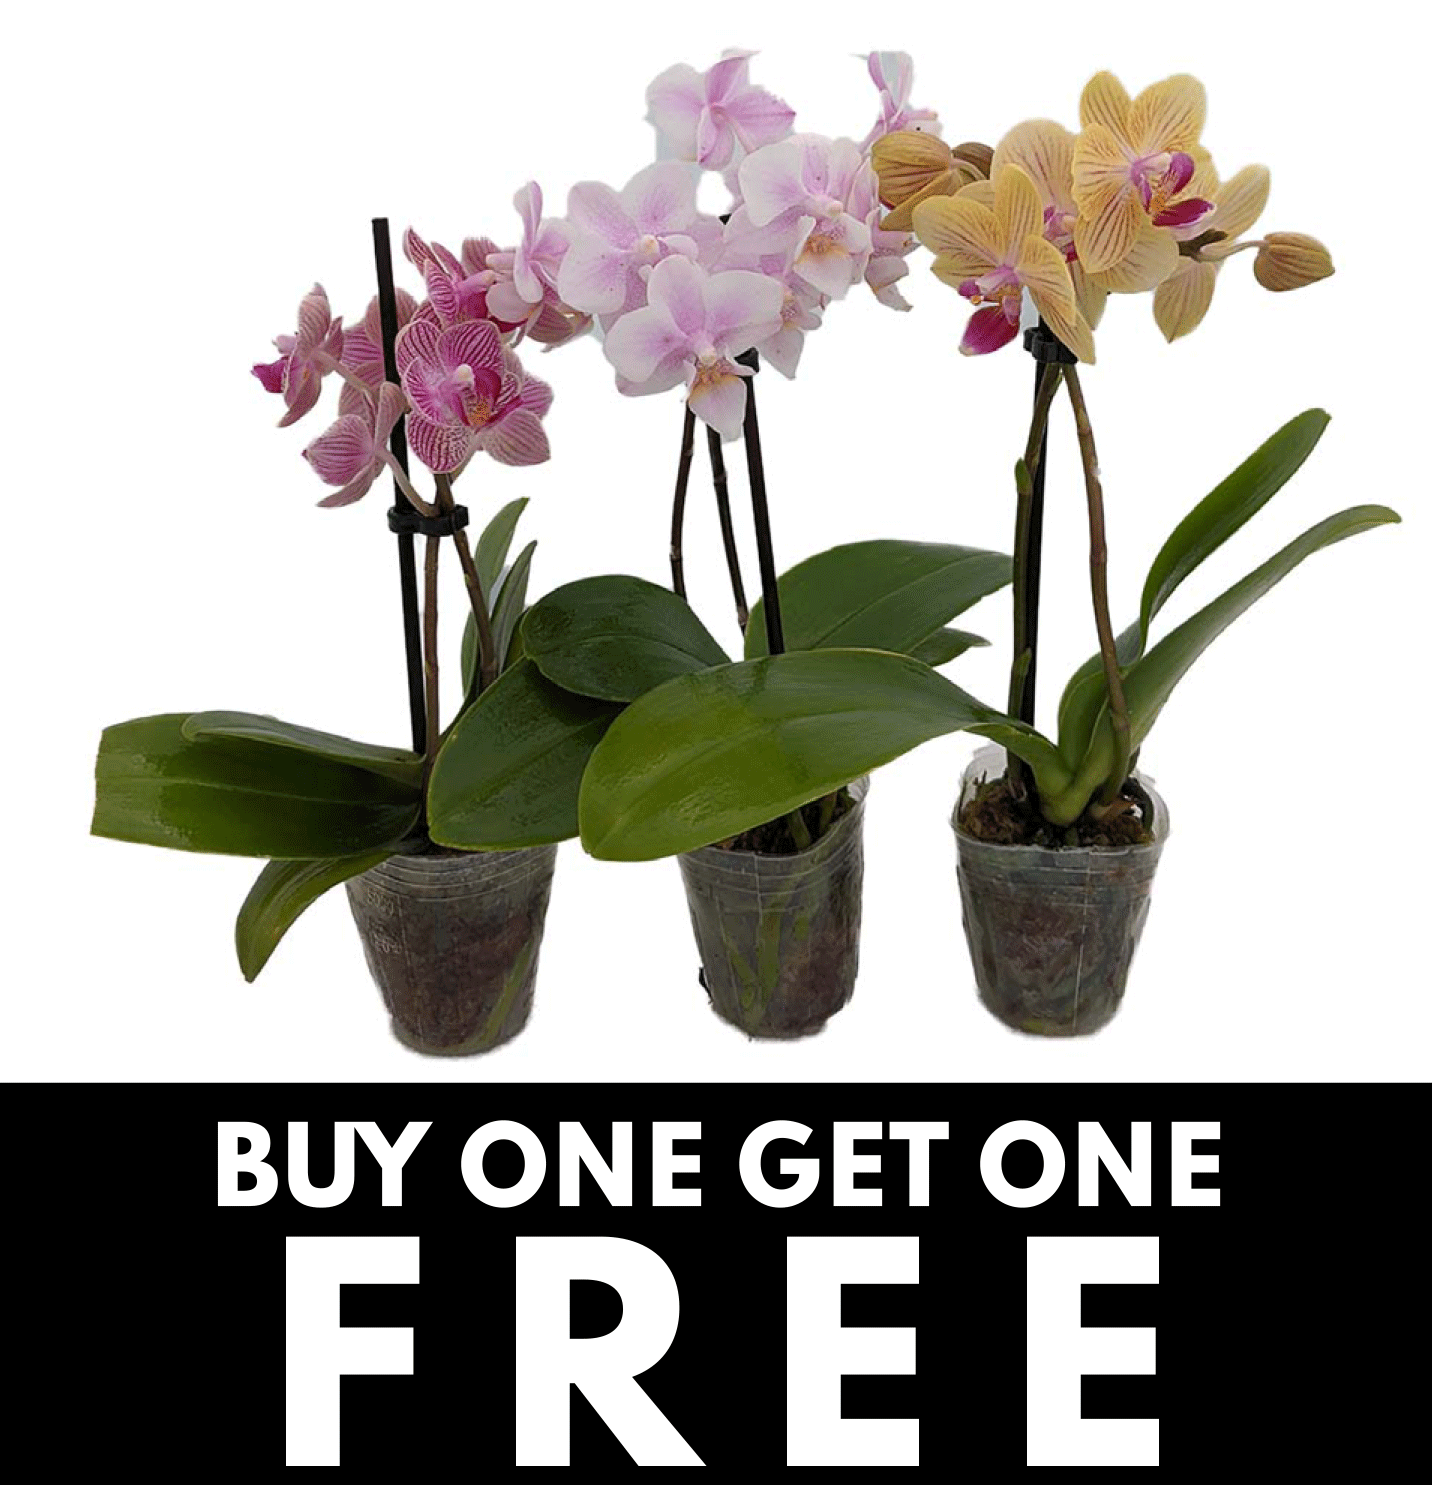 BUY ONE GET ONE FREE MINI ORCHID, with $10 Minimum Purchase!